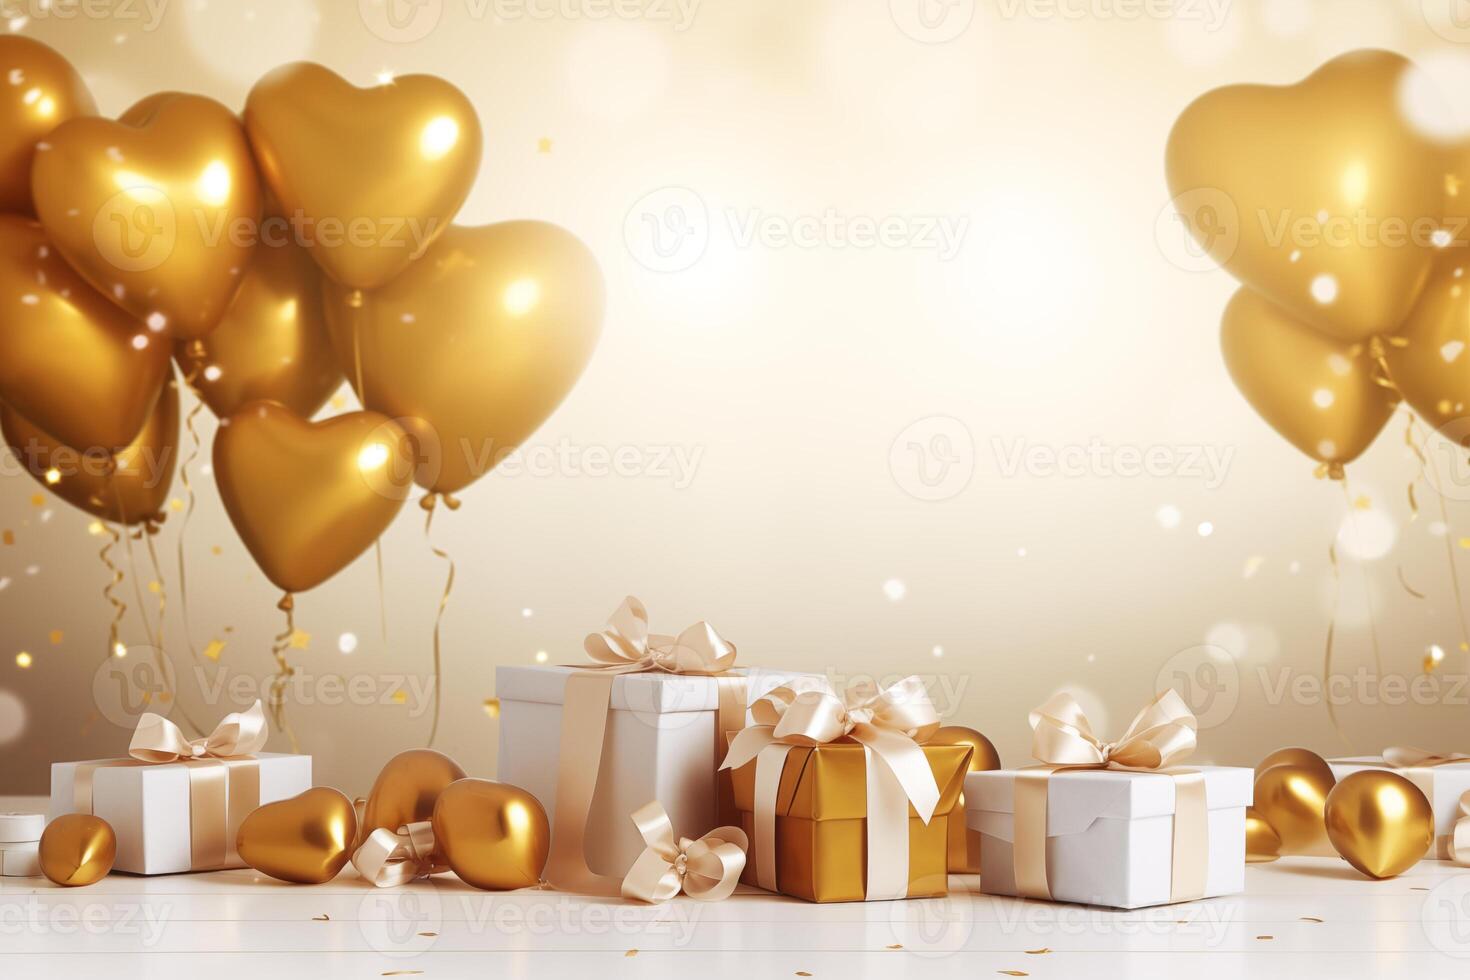 Happy Valentine's Day love or birthday celebration holiday background banner illustration greeting card - Gold heart balloons and gold white gift boxes on table photo